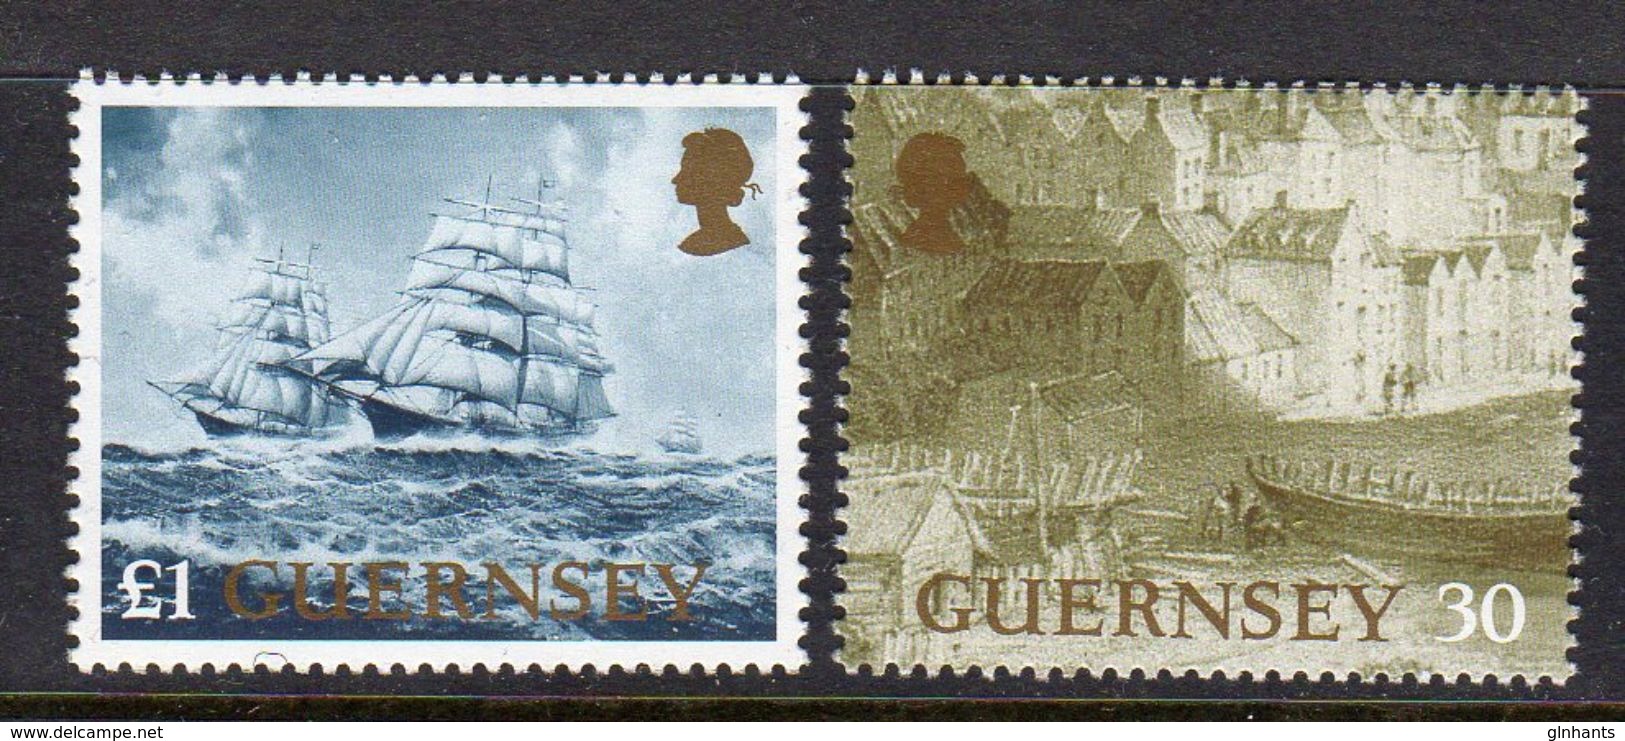 GUERNSEY GB - 1997 PACIFIC '97 BOATYARD STAMPS EX SG MS740 FINE MNH ** - Guernsey